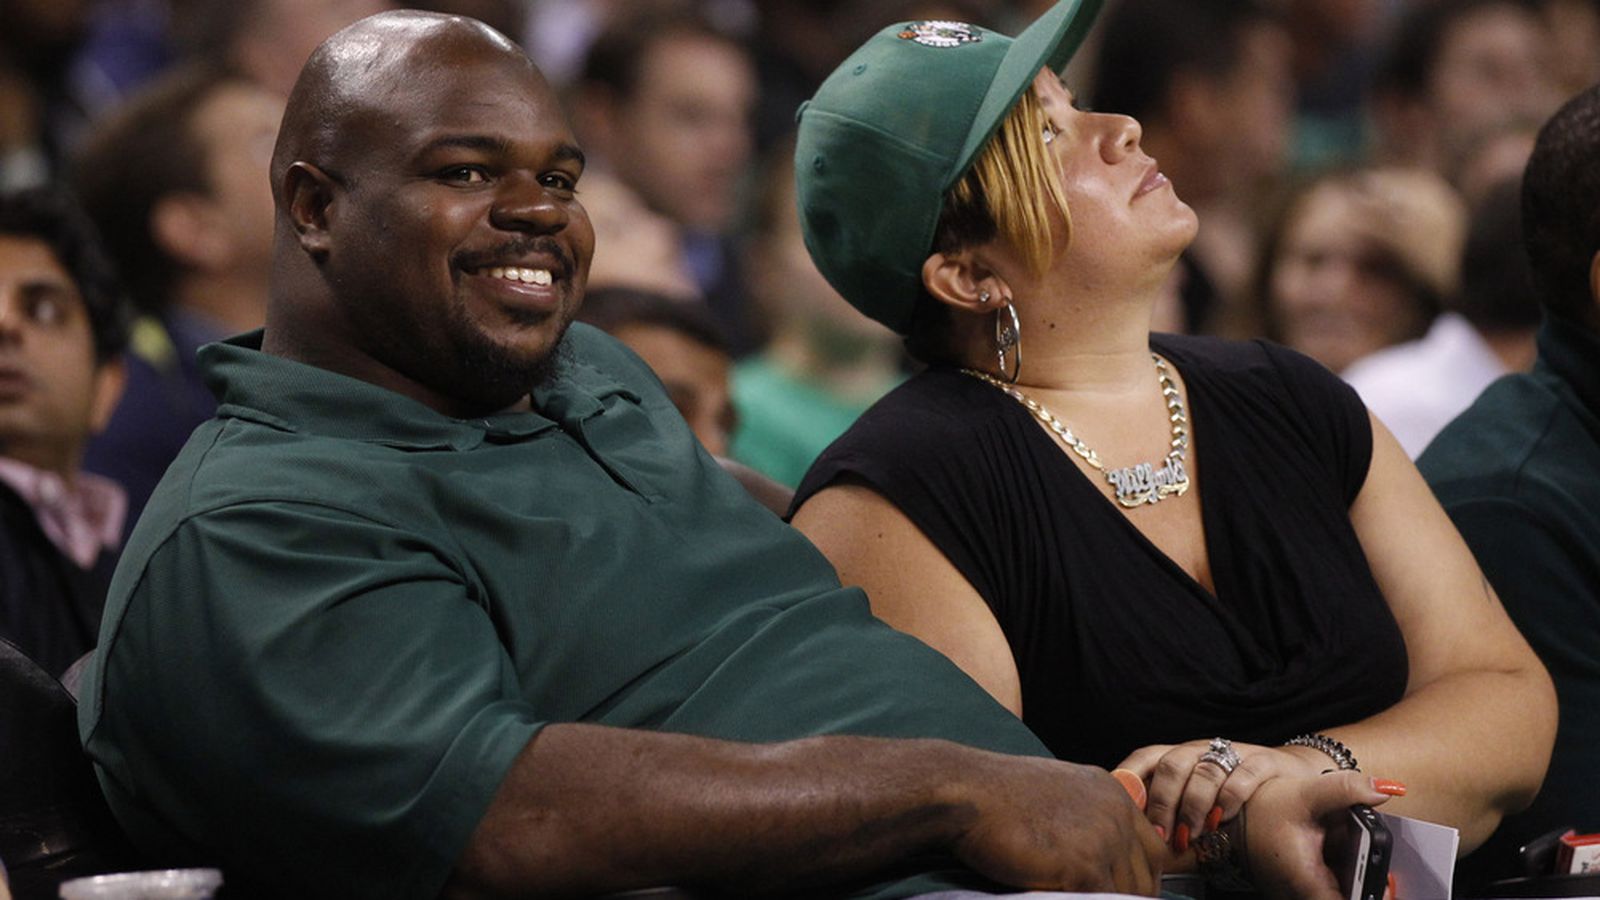 Vince Wilfork upset after Ted Johnson calls his wife 'ugly' - SBNation.com